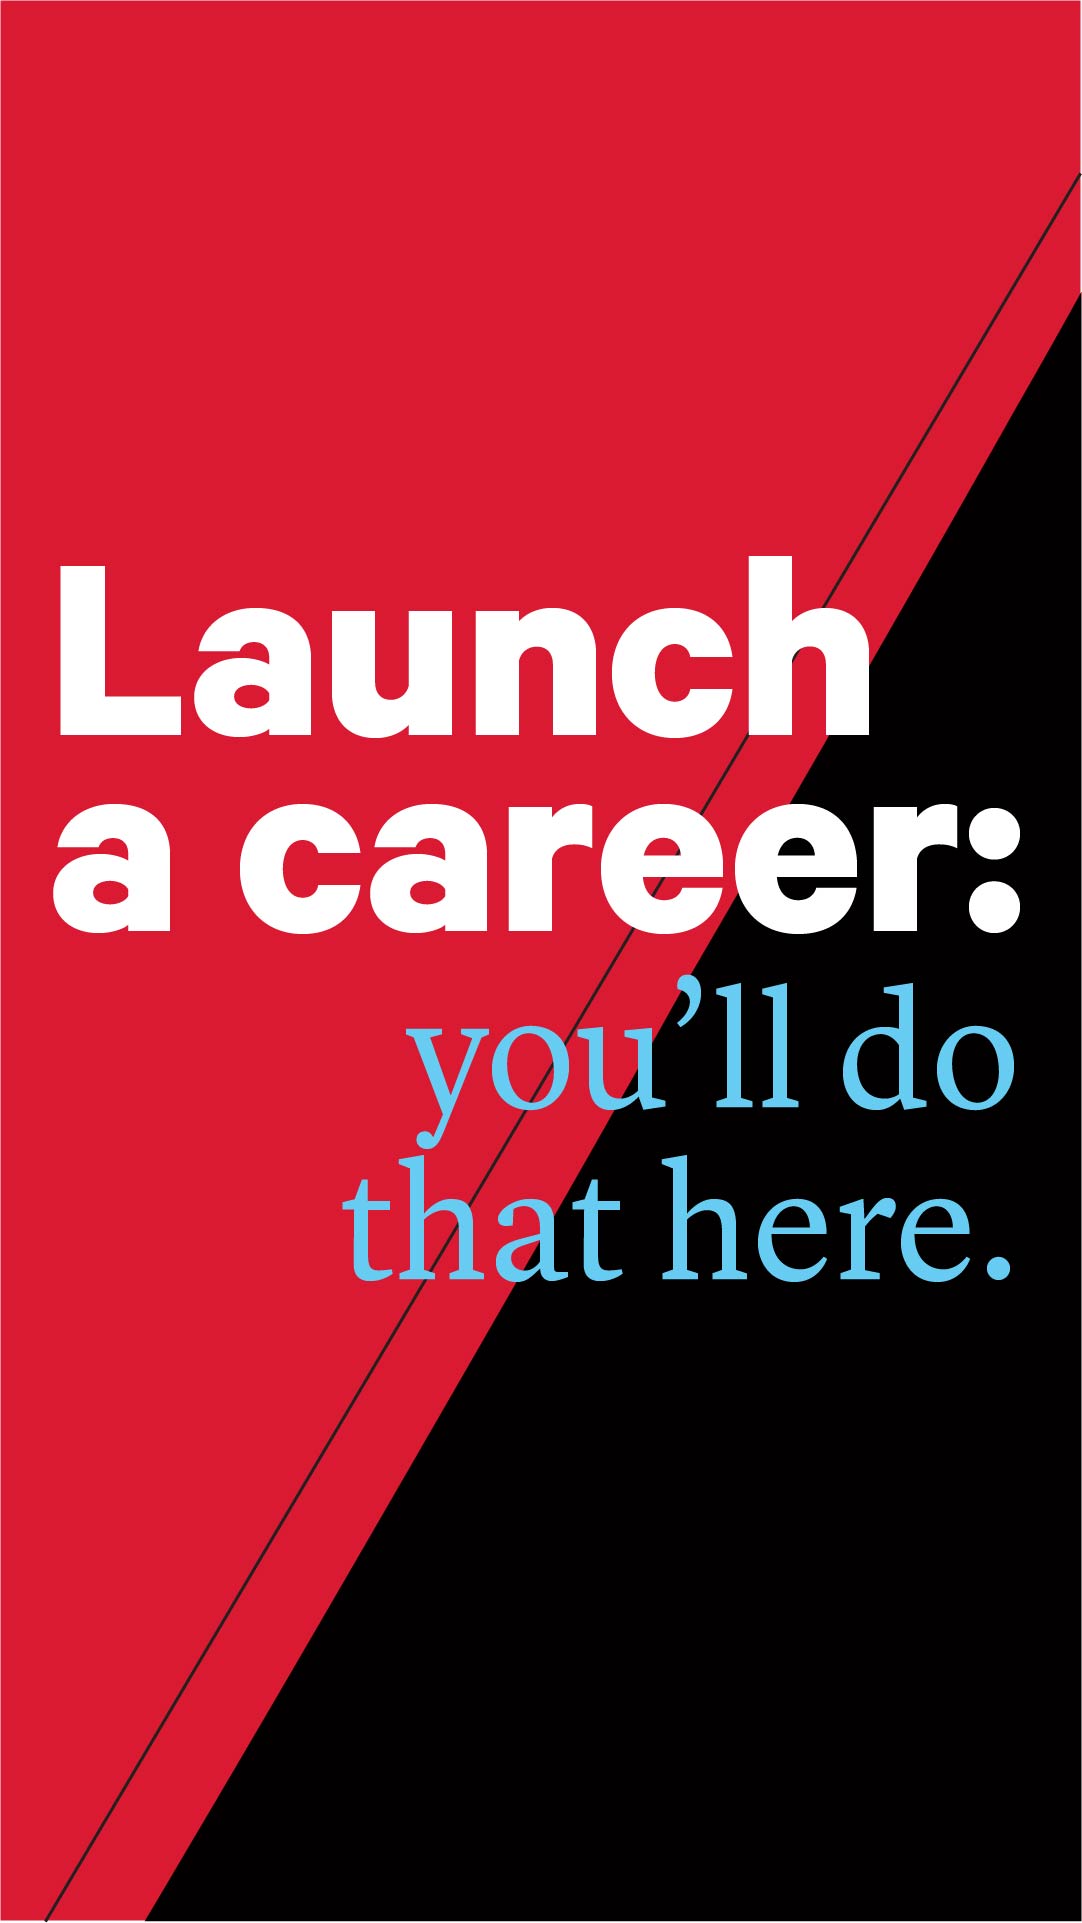 red and black graphic with the text "Launch a career, you'll do that here."